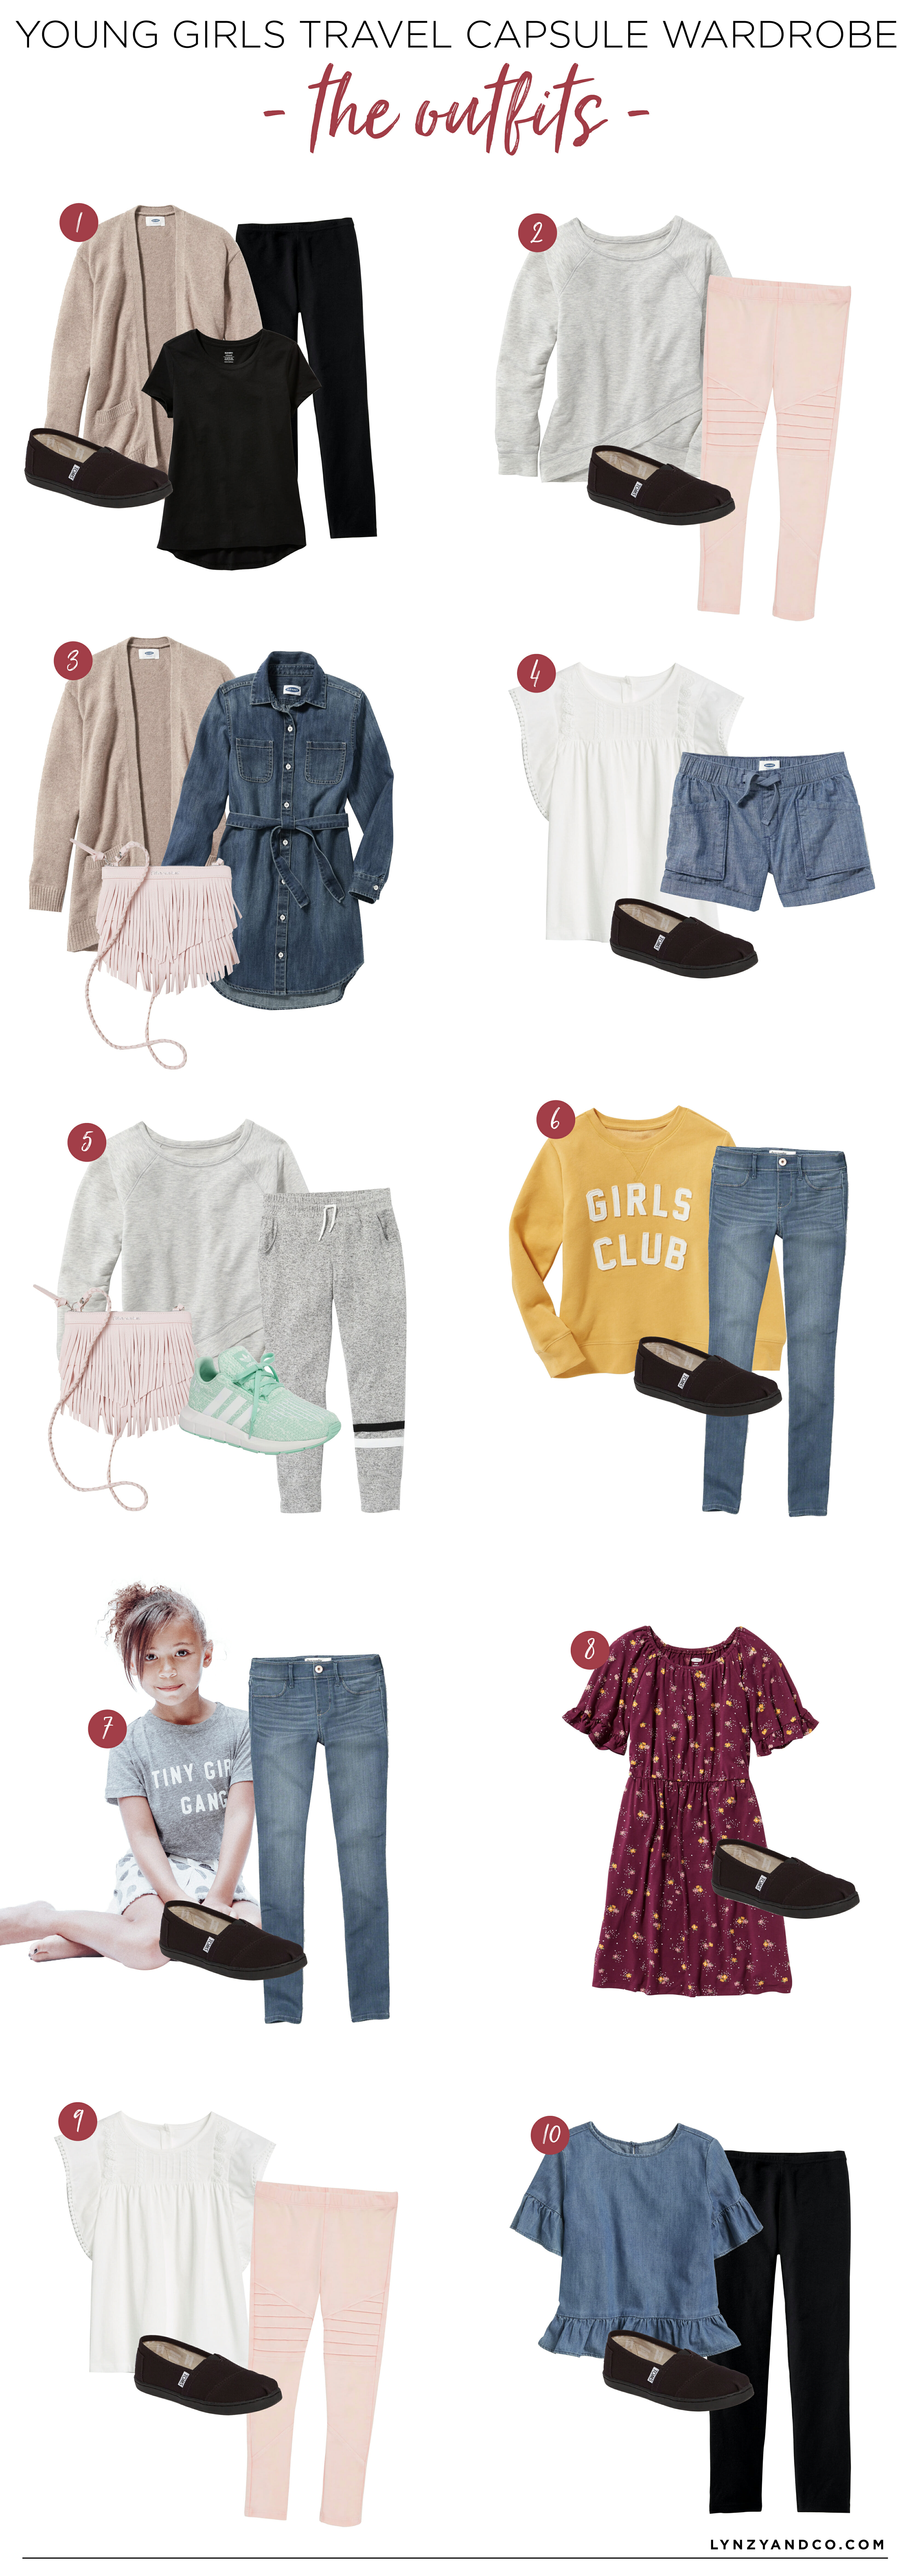 Young Girls Capsule Wardrobe for Travel // Packing for Kids